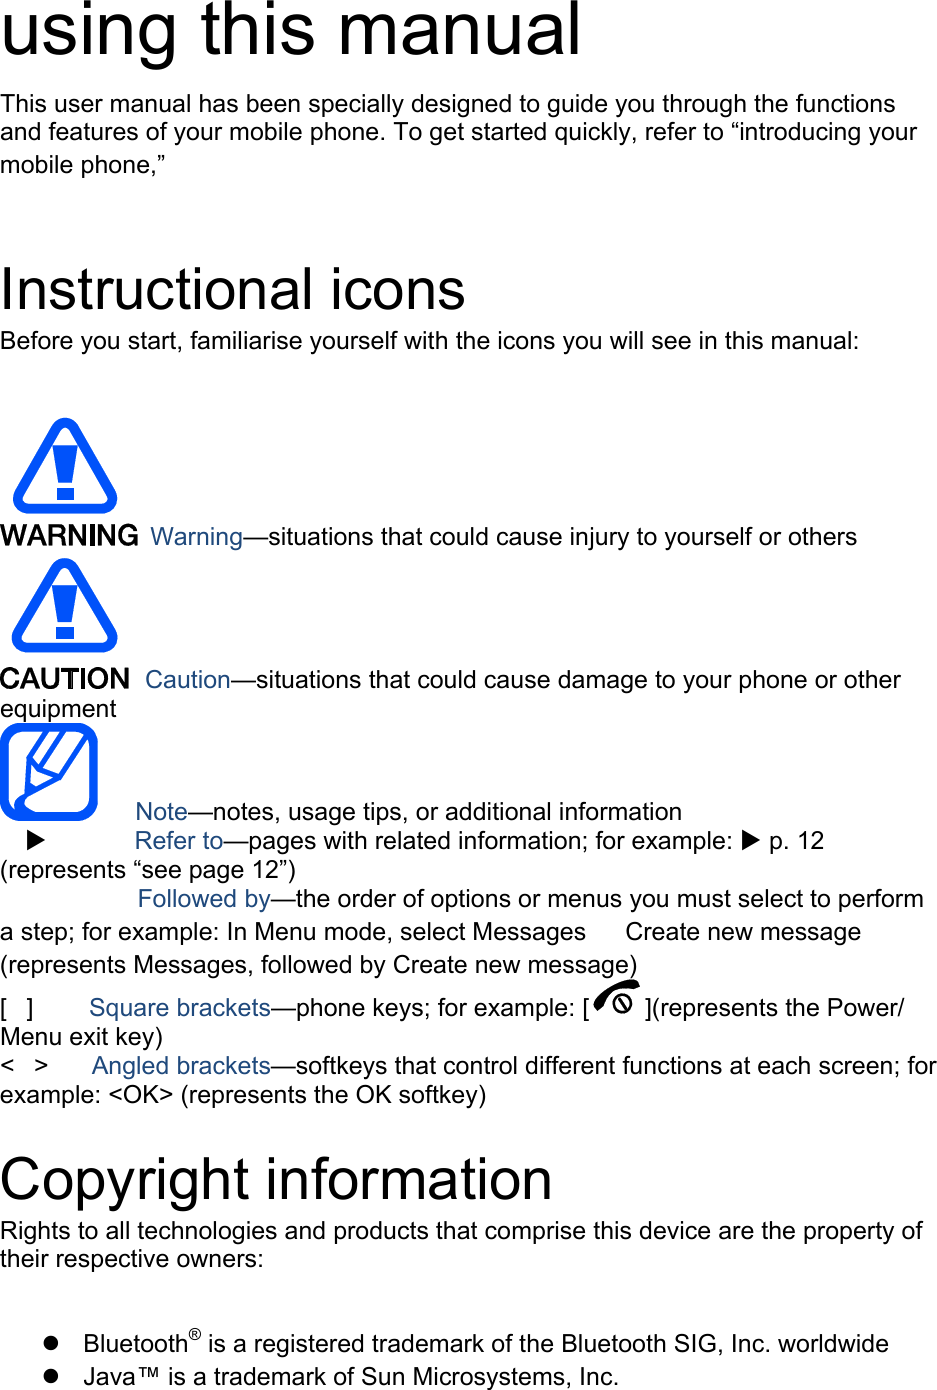 using this manual This user manual has been specially designed to guide you through the functions and features of your mobile phone. To get started quickly, refer to “introducing your mobile phone,”   Instructional icons Before you start, familiarise yourself with the icons you will see in this manual:     Warning—situations that could cause injury to yourself or others  Caution—situations that could cause damage to your phone or other equipment    Note—notes, usage tips, or additional information          Refer to—pages with related information; for example:  p. 12 (represents “see page 12”) 　　　     Followed by—the order of options or menus you must select to perform a step; for example: In Menu mode, select Messages 　 Create new message (represents Messages, followed by Create new message) [  ]     Square brackets—phone keys; for example: [ ](represents the Power/ Menu exit key) &lt;  &gt;    Angled brackets—softkeys that control different functions at each screen; for example: &lt;OK&gt; (represents the OK softkey)  Copyright information Rights to all technologies and products that comprise this device are the property of their respective owners:   Bluetooth® is a registered trademark of the Bluetooth SIG, Inc. worldwide   Java™ is a trademark of Sun Microsystems, Inc. 